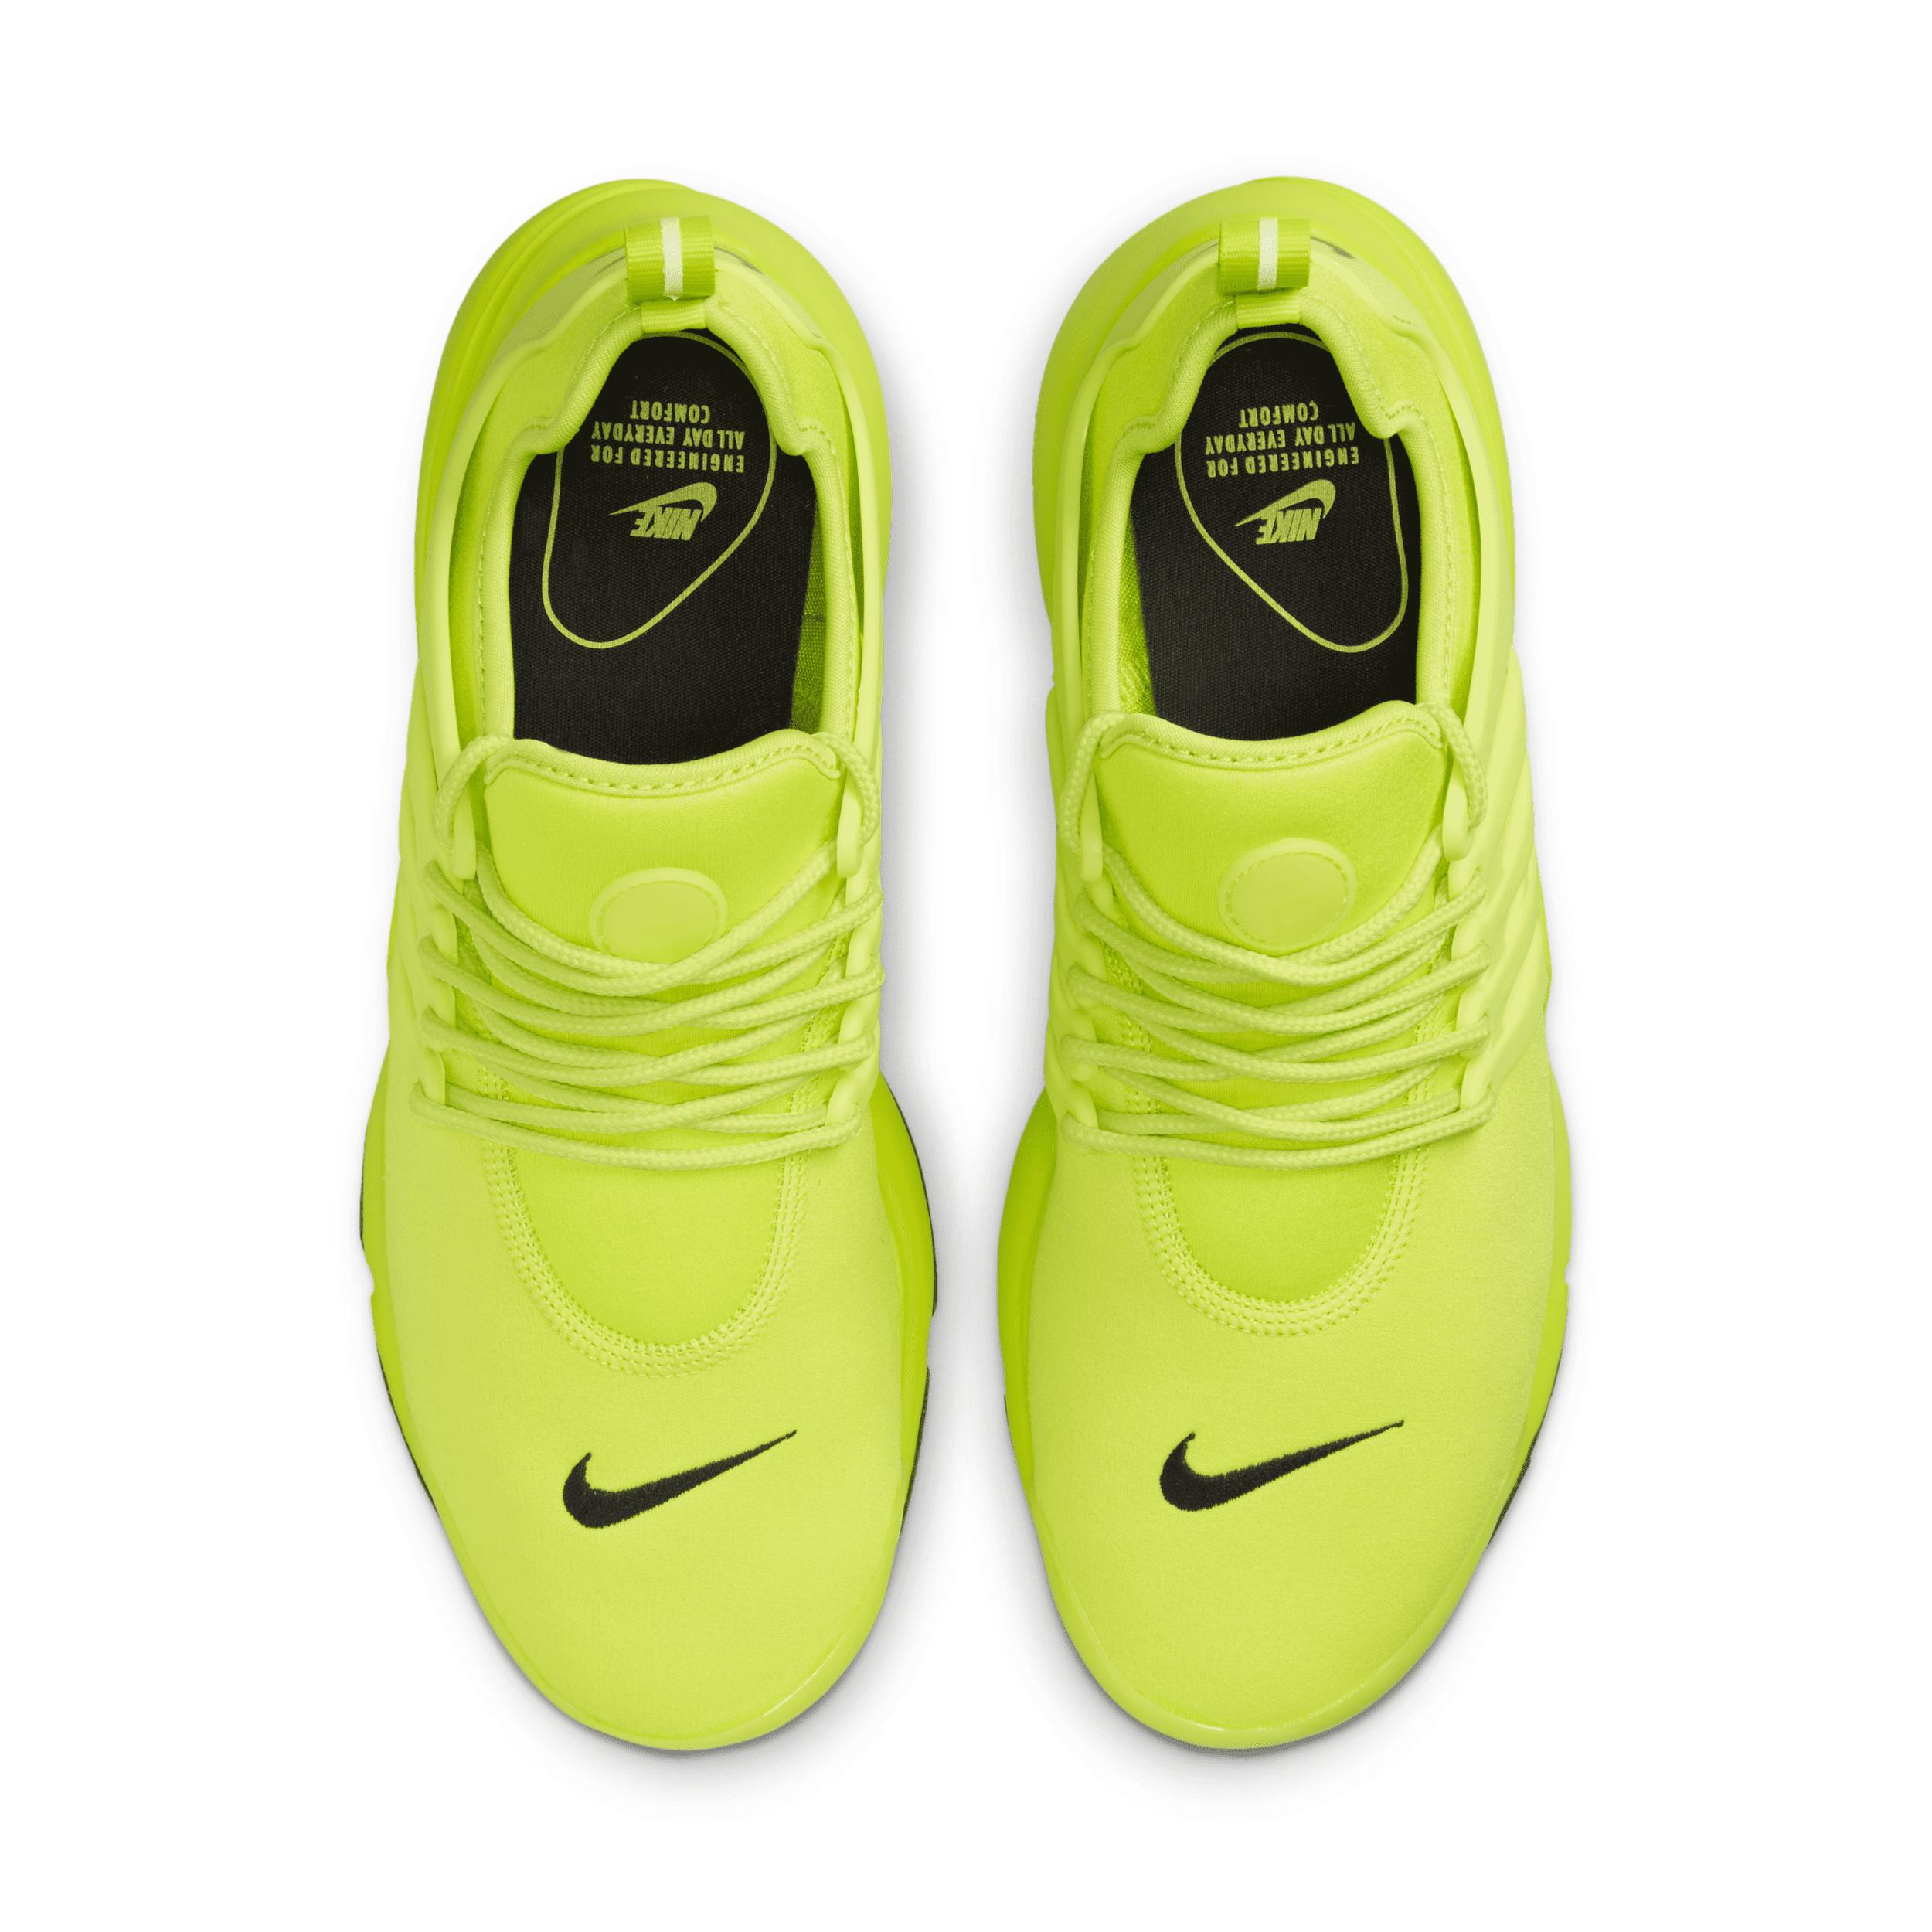 Nike Air Presto Shoes In Green, in Yellow | Lyst